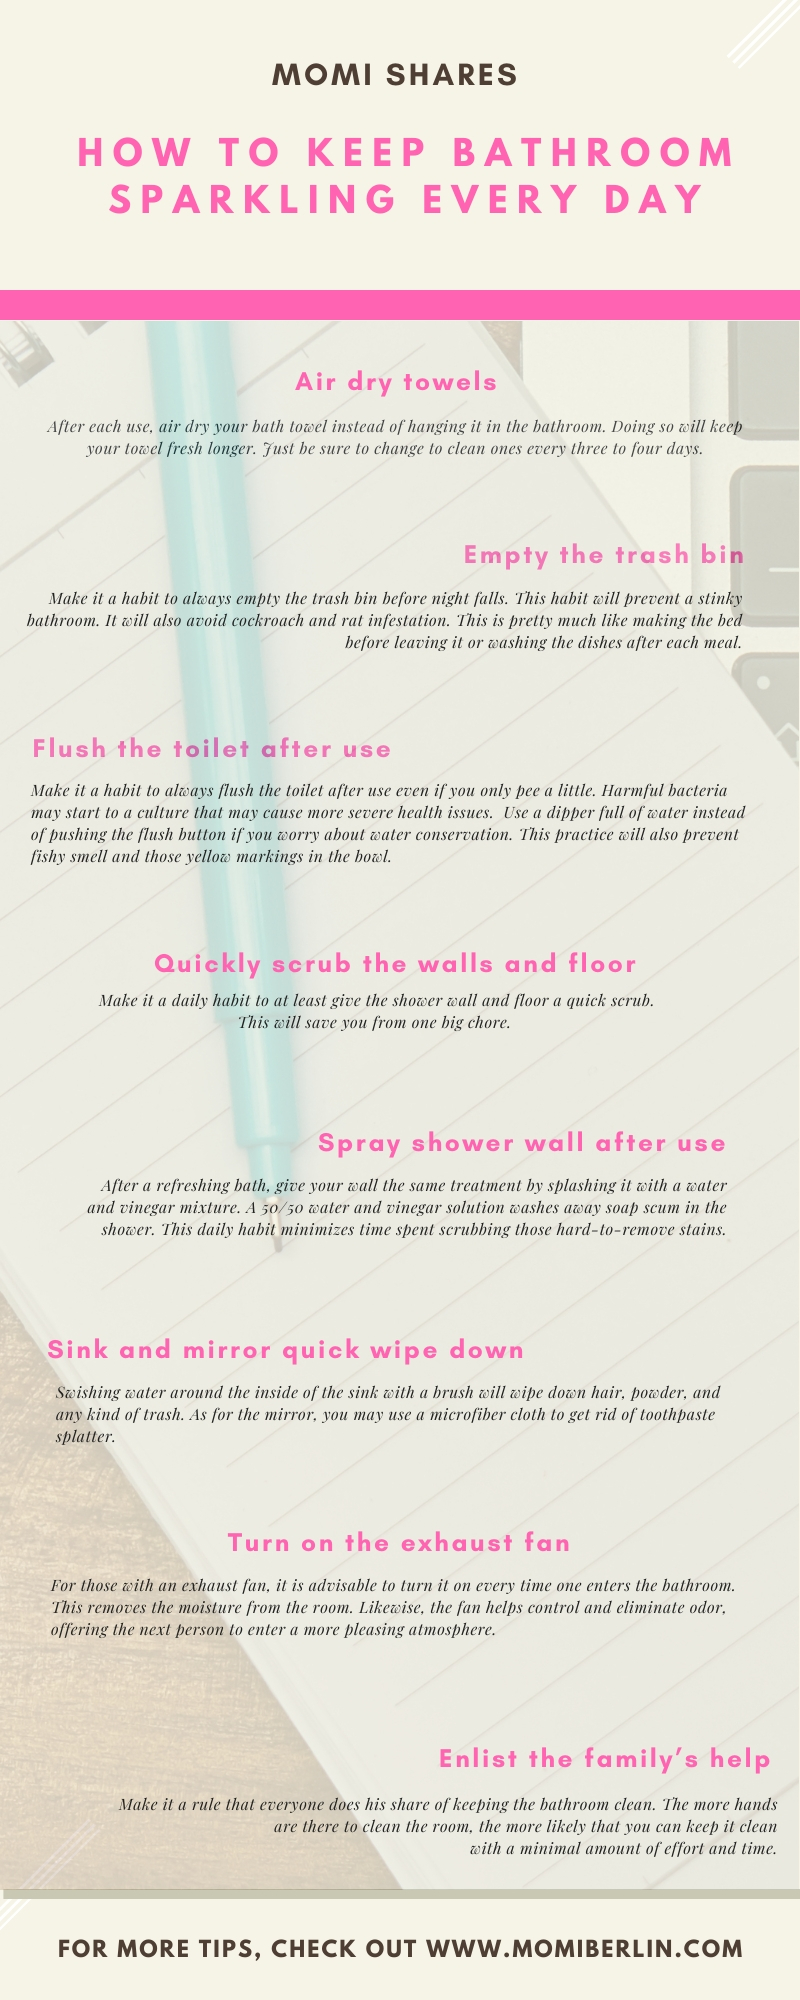 How to keep bathroom sparkling every day